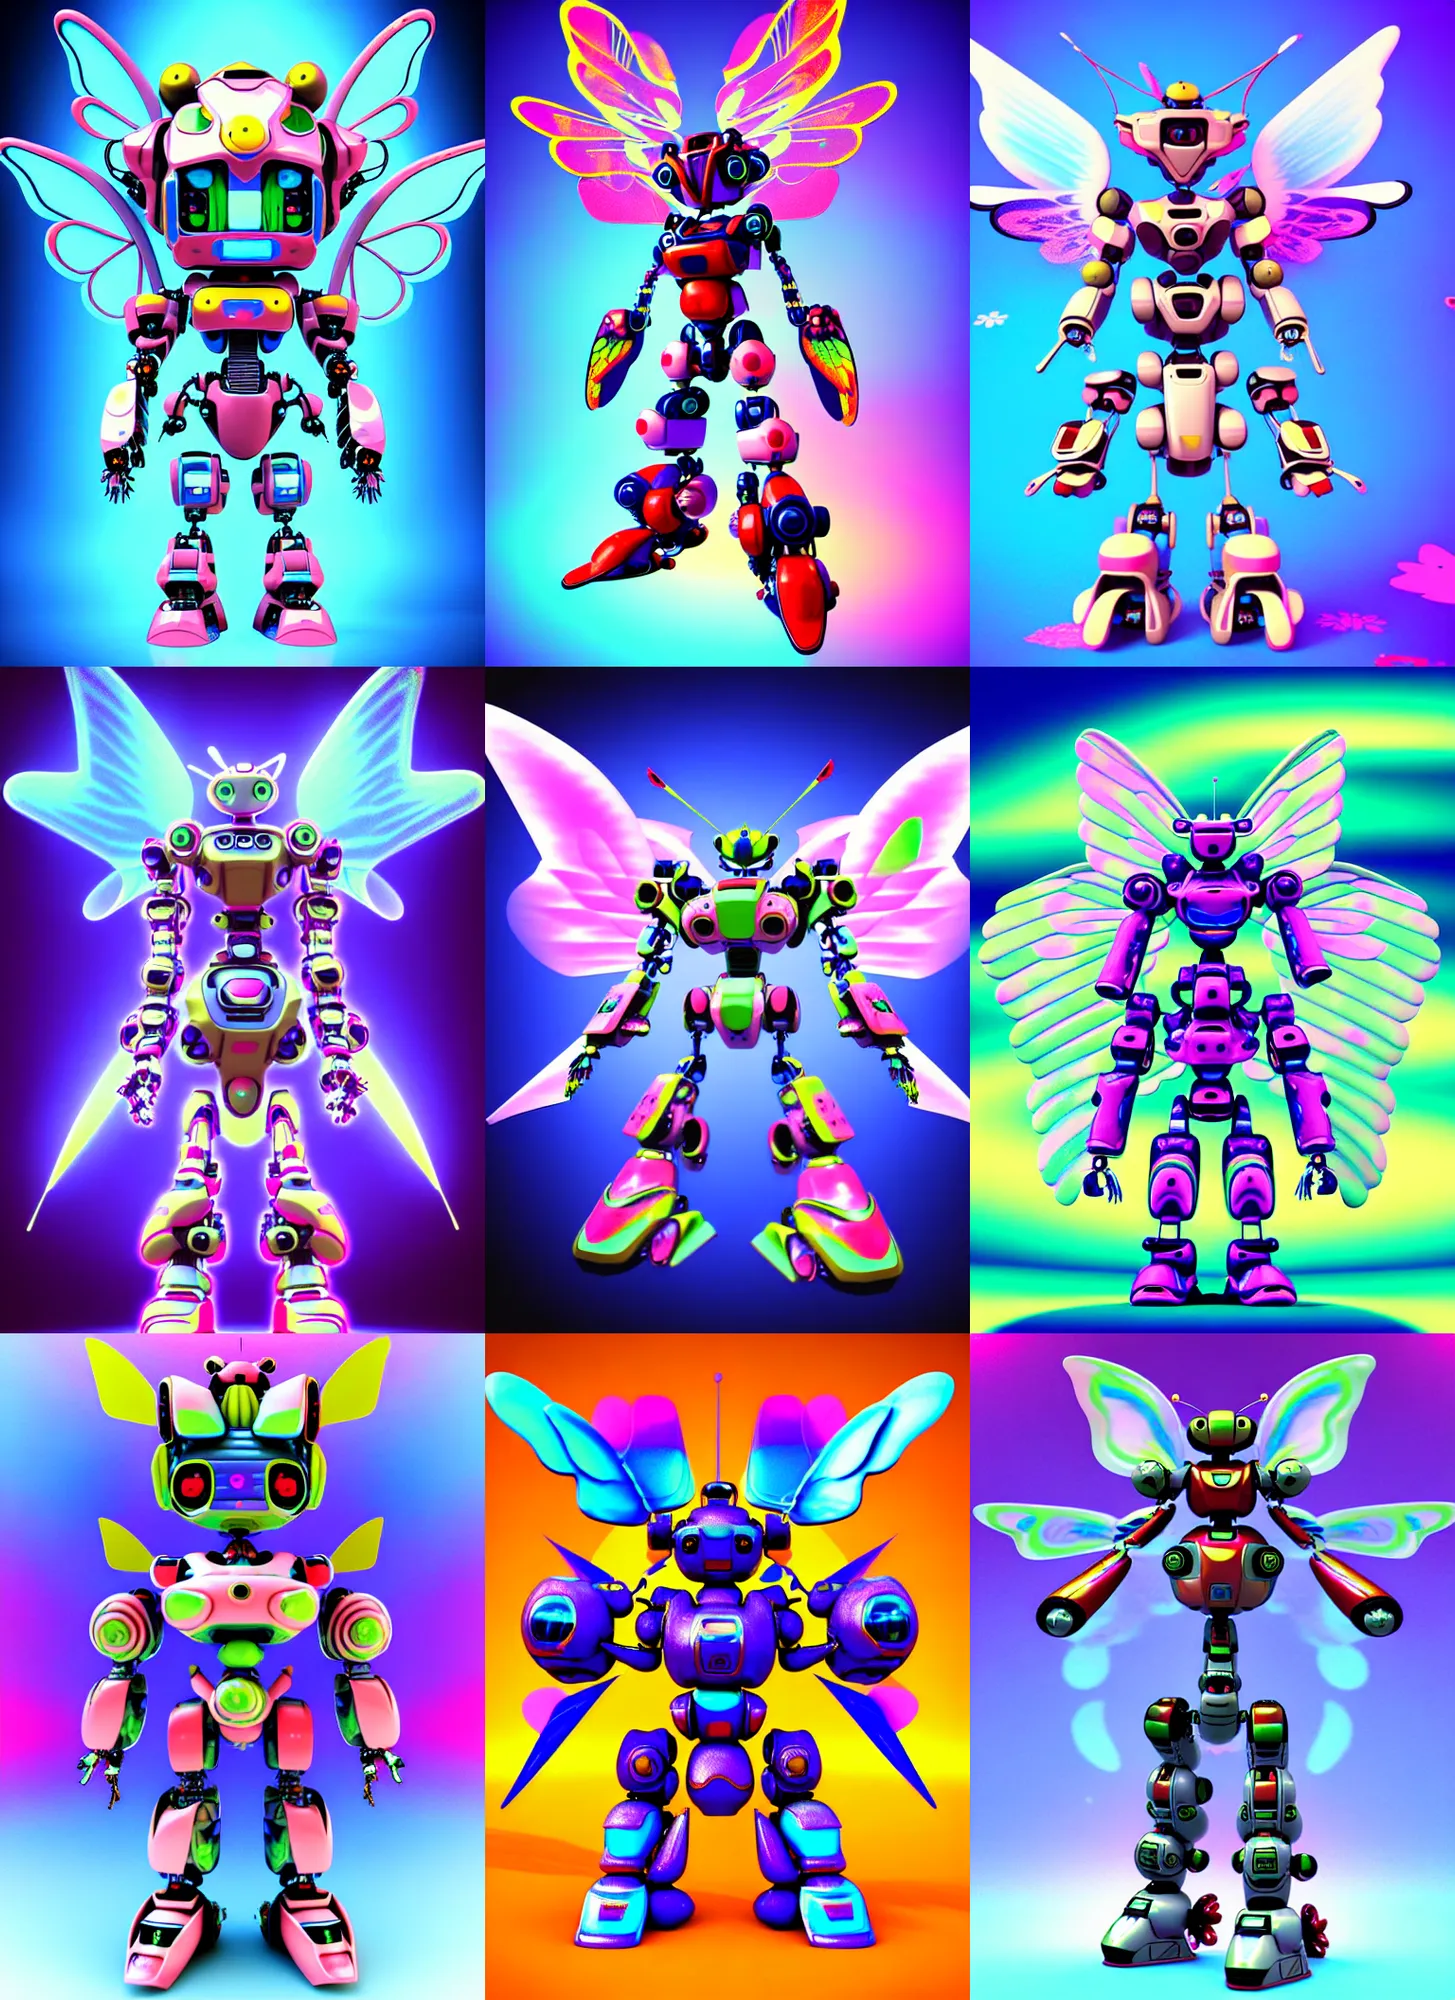 Prompt: 3d render of chibi mech robot by Ichiro Tanida wearing angel wings against a psychedelic swirly background with 3d butterflies and 3d flowers n the style of 1990's CG graphics 3d rendered y2K aesthetic by Ichiro Tanida, 3DO magazine